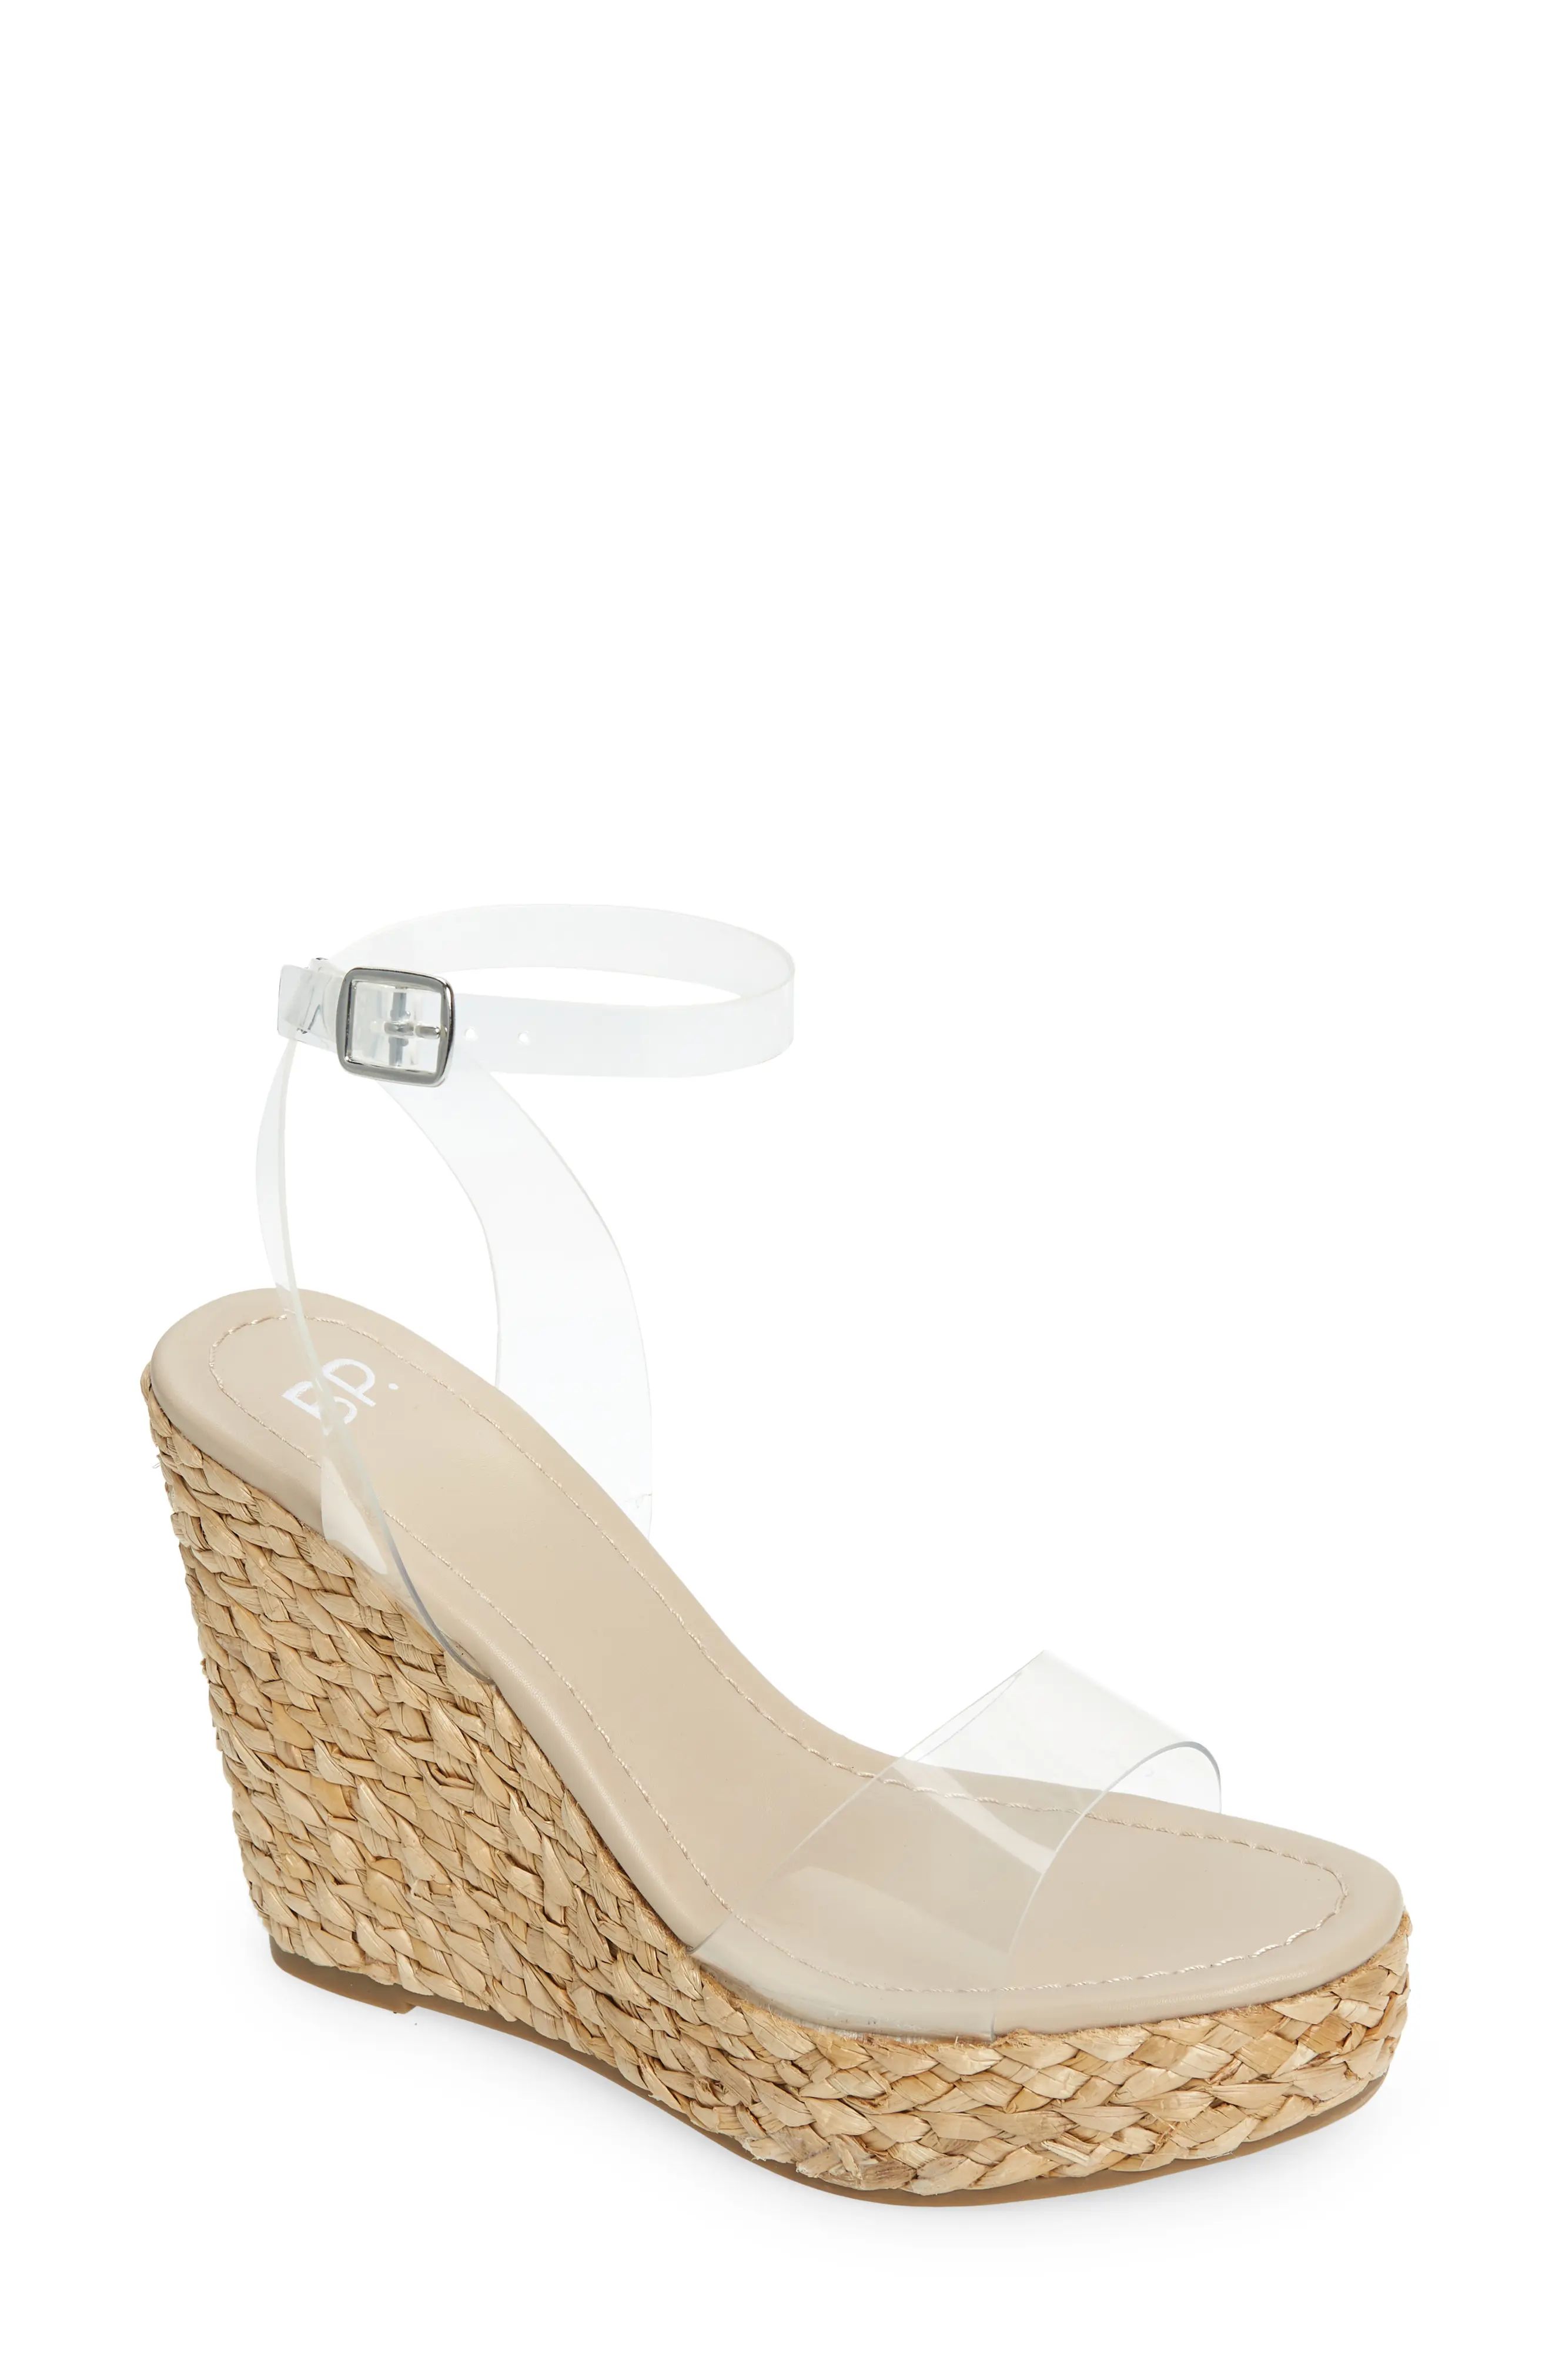 BP. Ginny Espadrille Ankle Strap Wedge Sandal in Clear at Nordstrom, Size 9.5 | Nordstrom